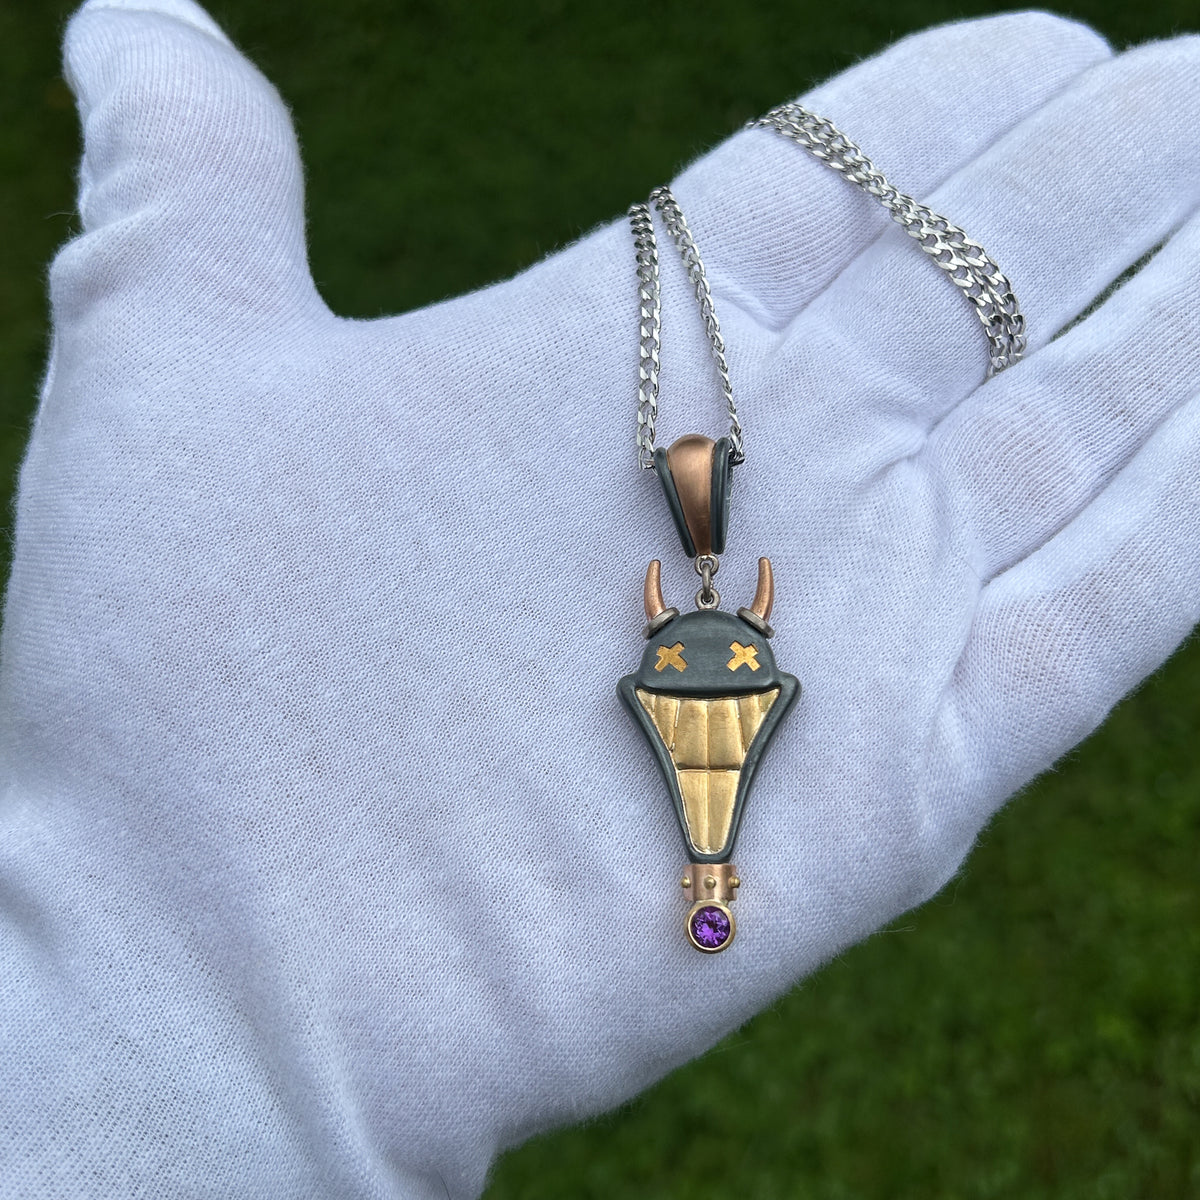 Large Smile Please hand crafted jewellery pendant. Hand crafted smile motif with horns in oxidised silver, 18ct yellow gold, rose gold, white gold and fine gold set with one amethyst. On white gloved hand for scale